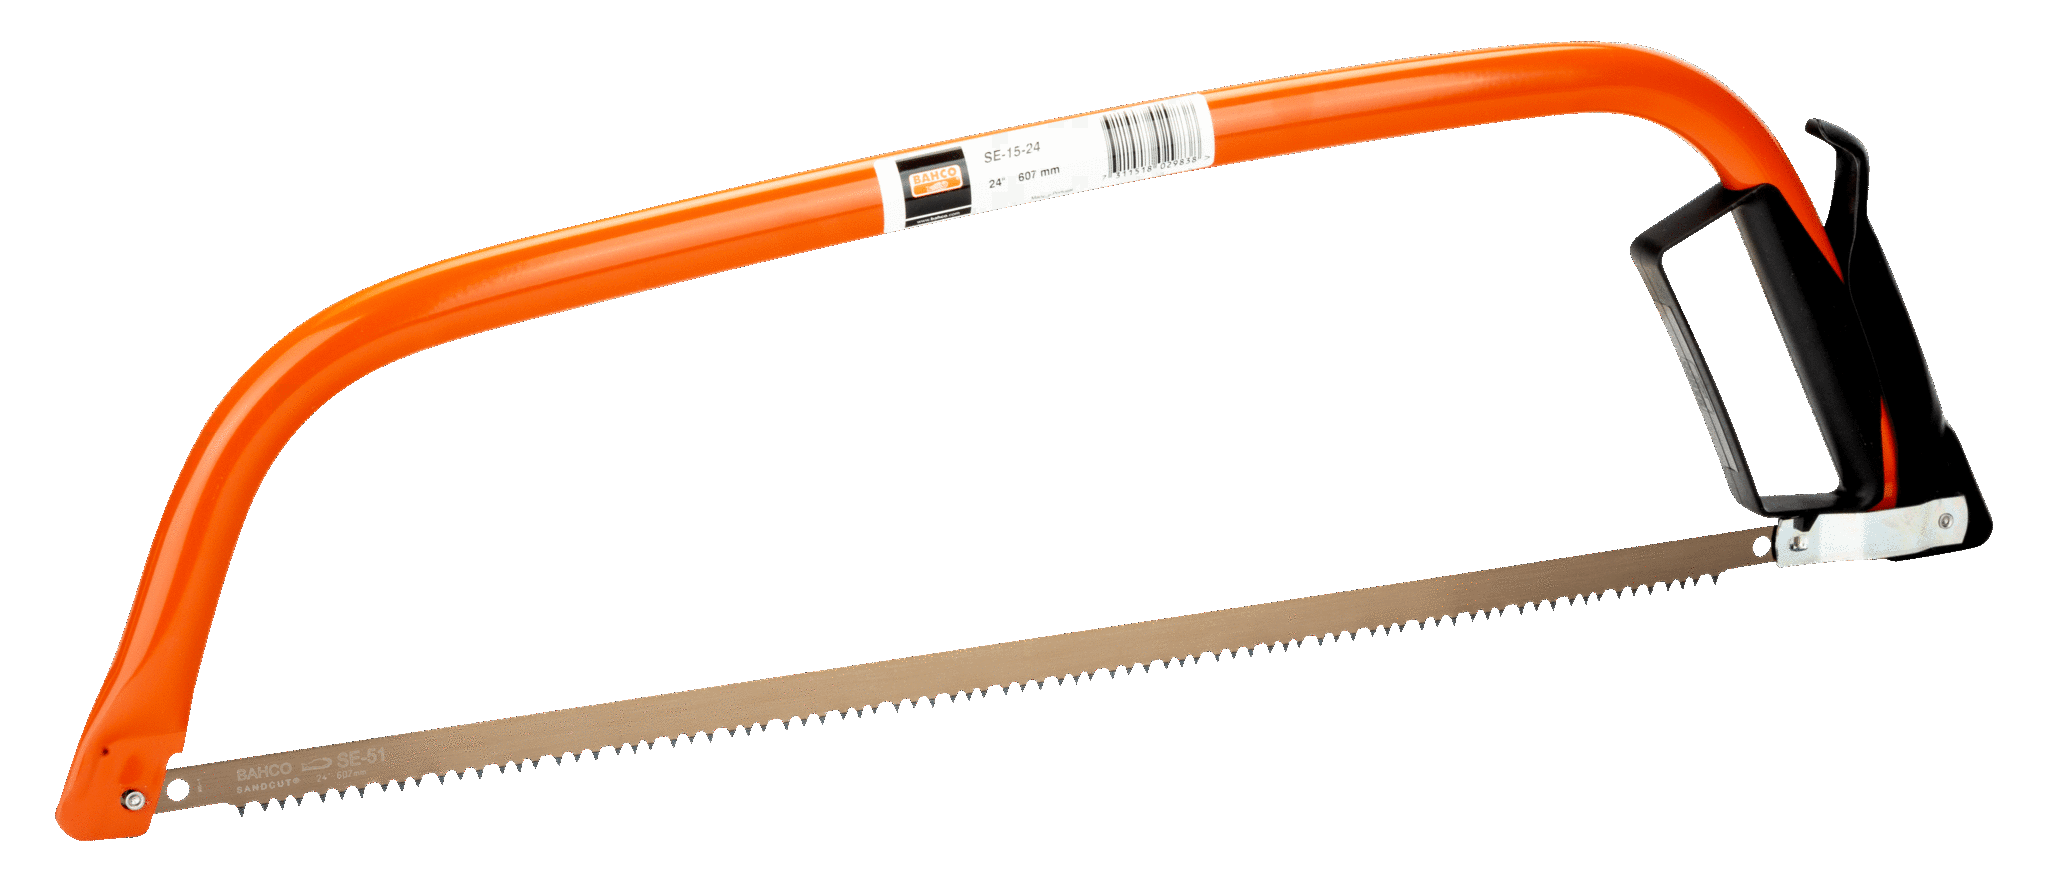 Saws General Purpose Bow Saws 21" to 36" | BAHCO | Bahco International